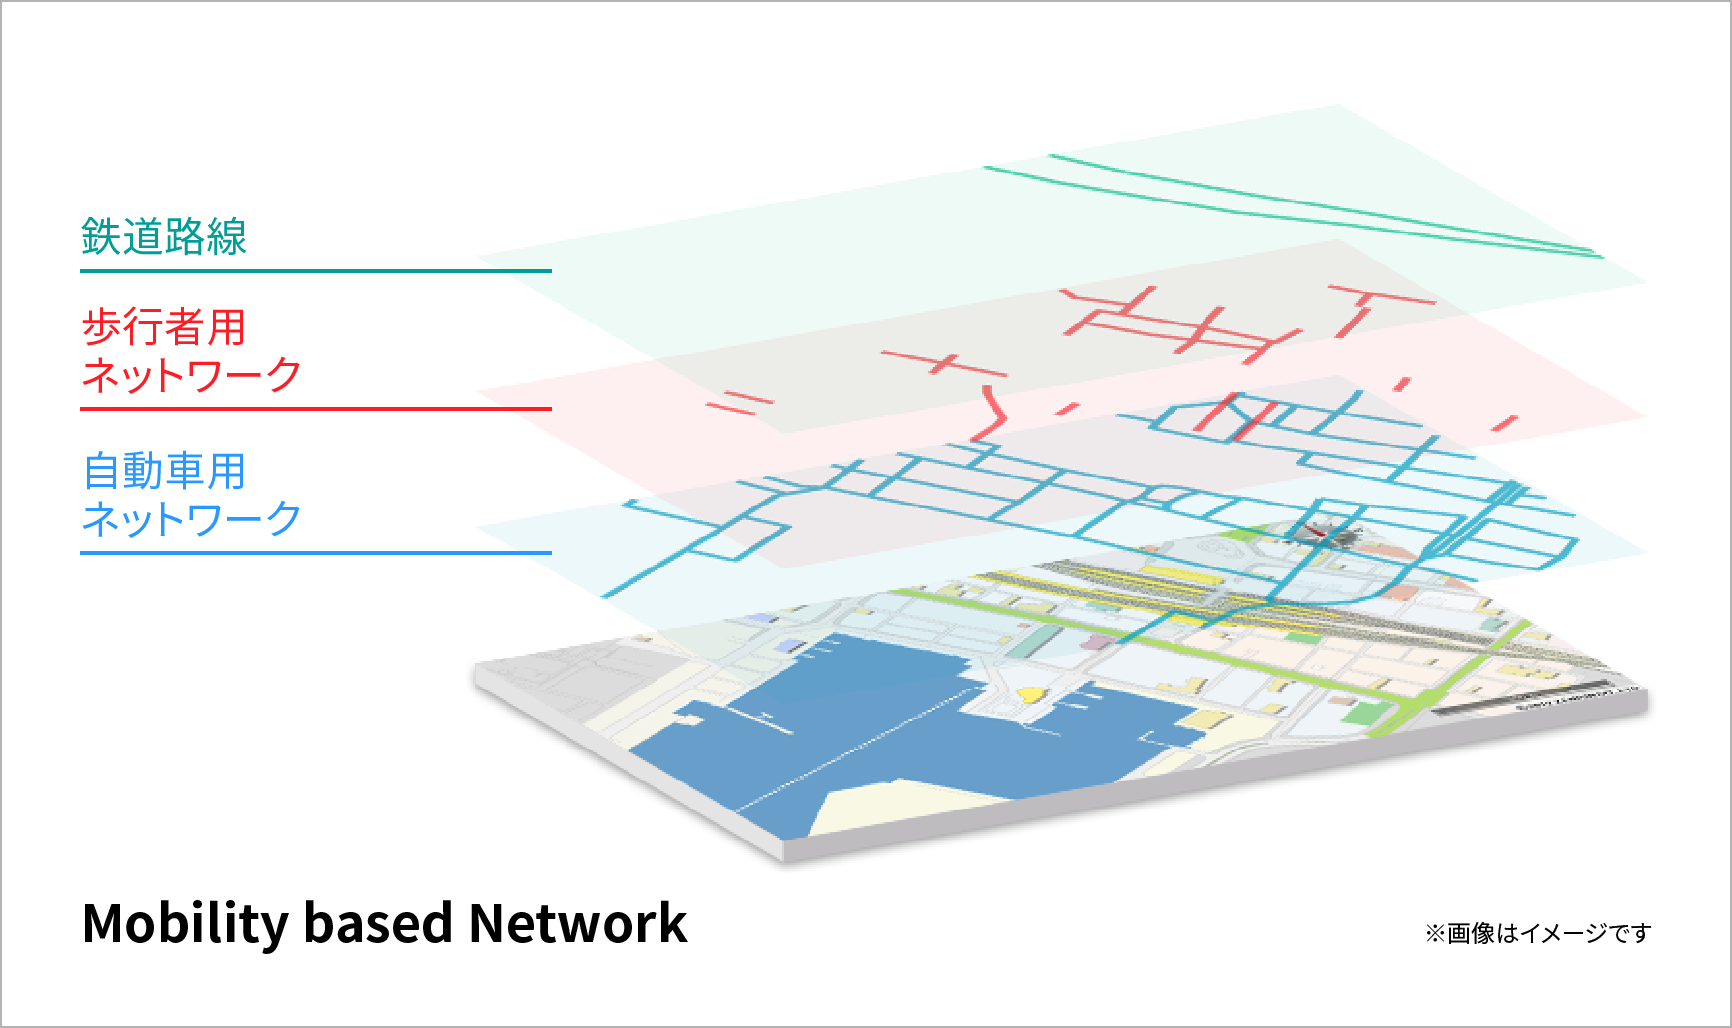 Mobility based Network